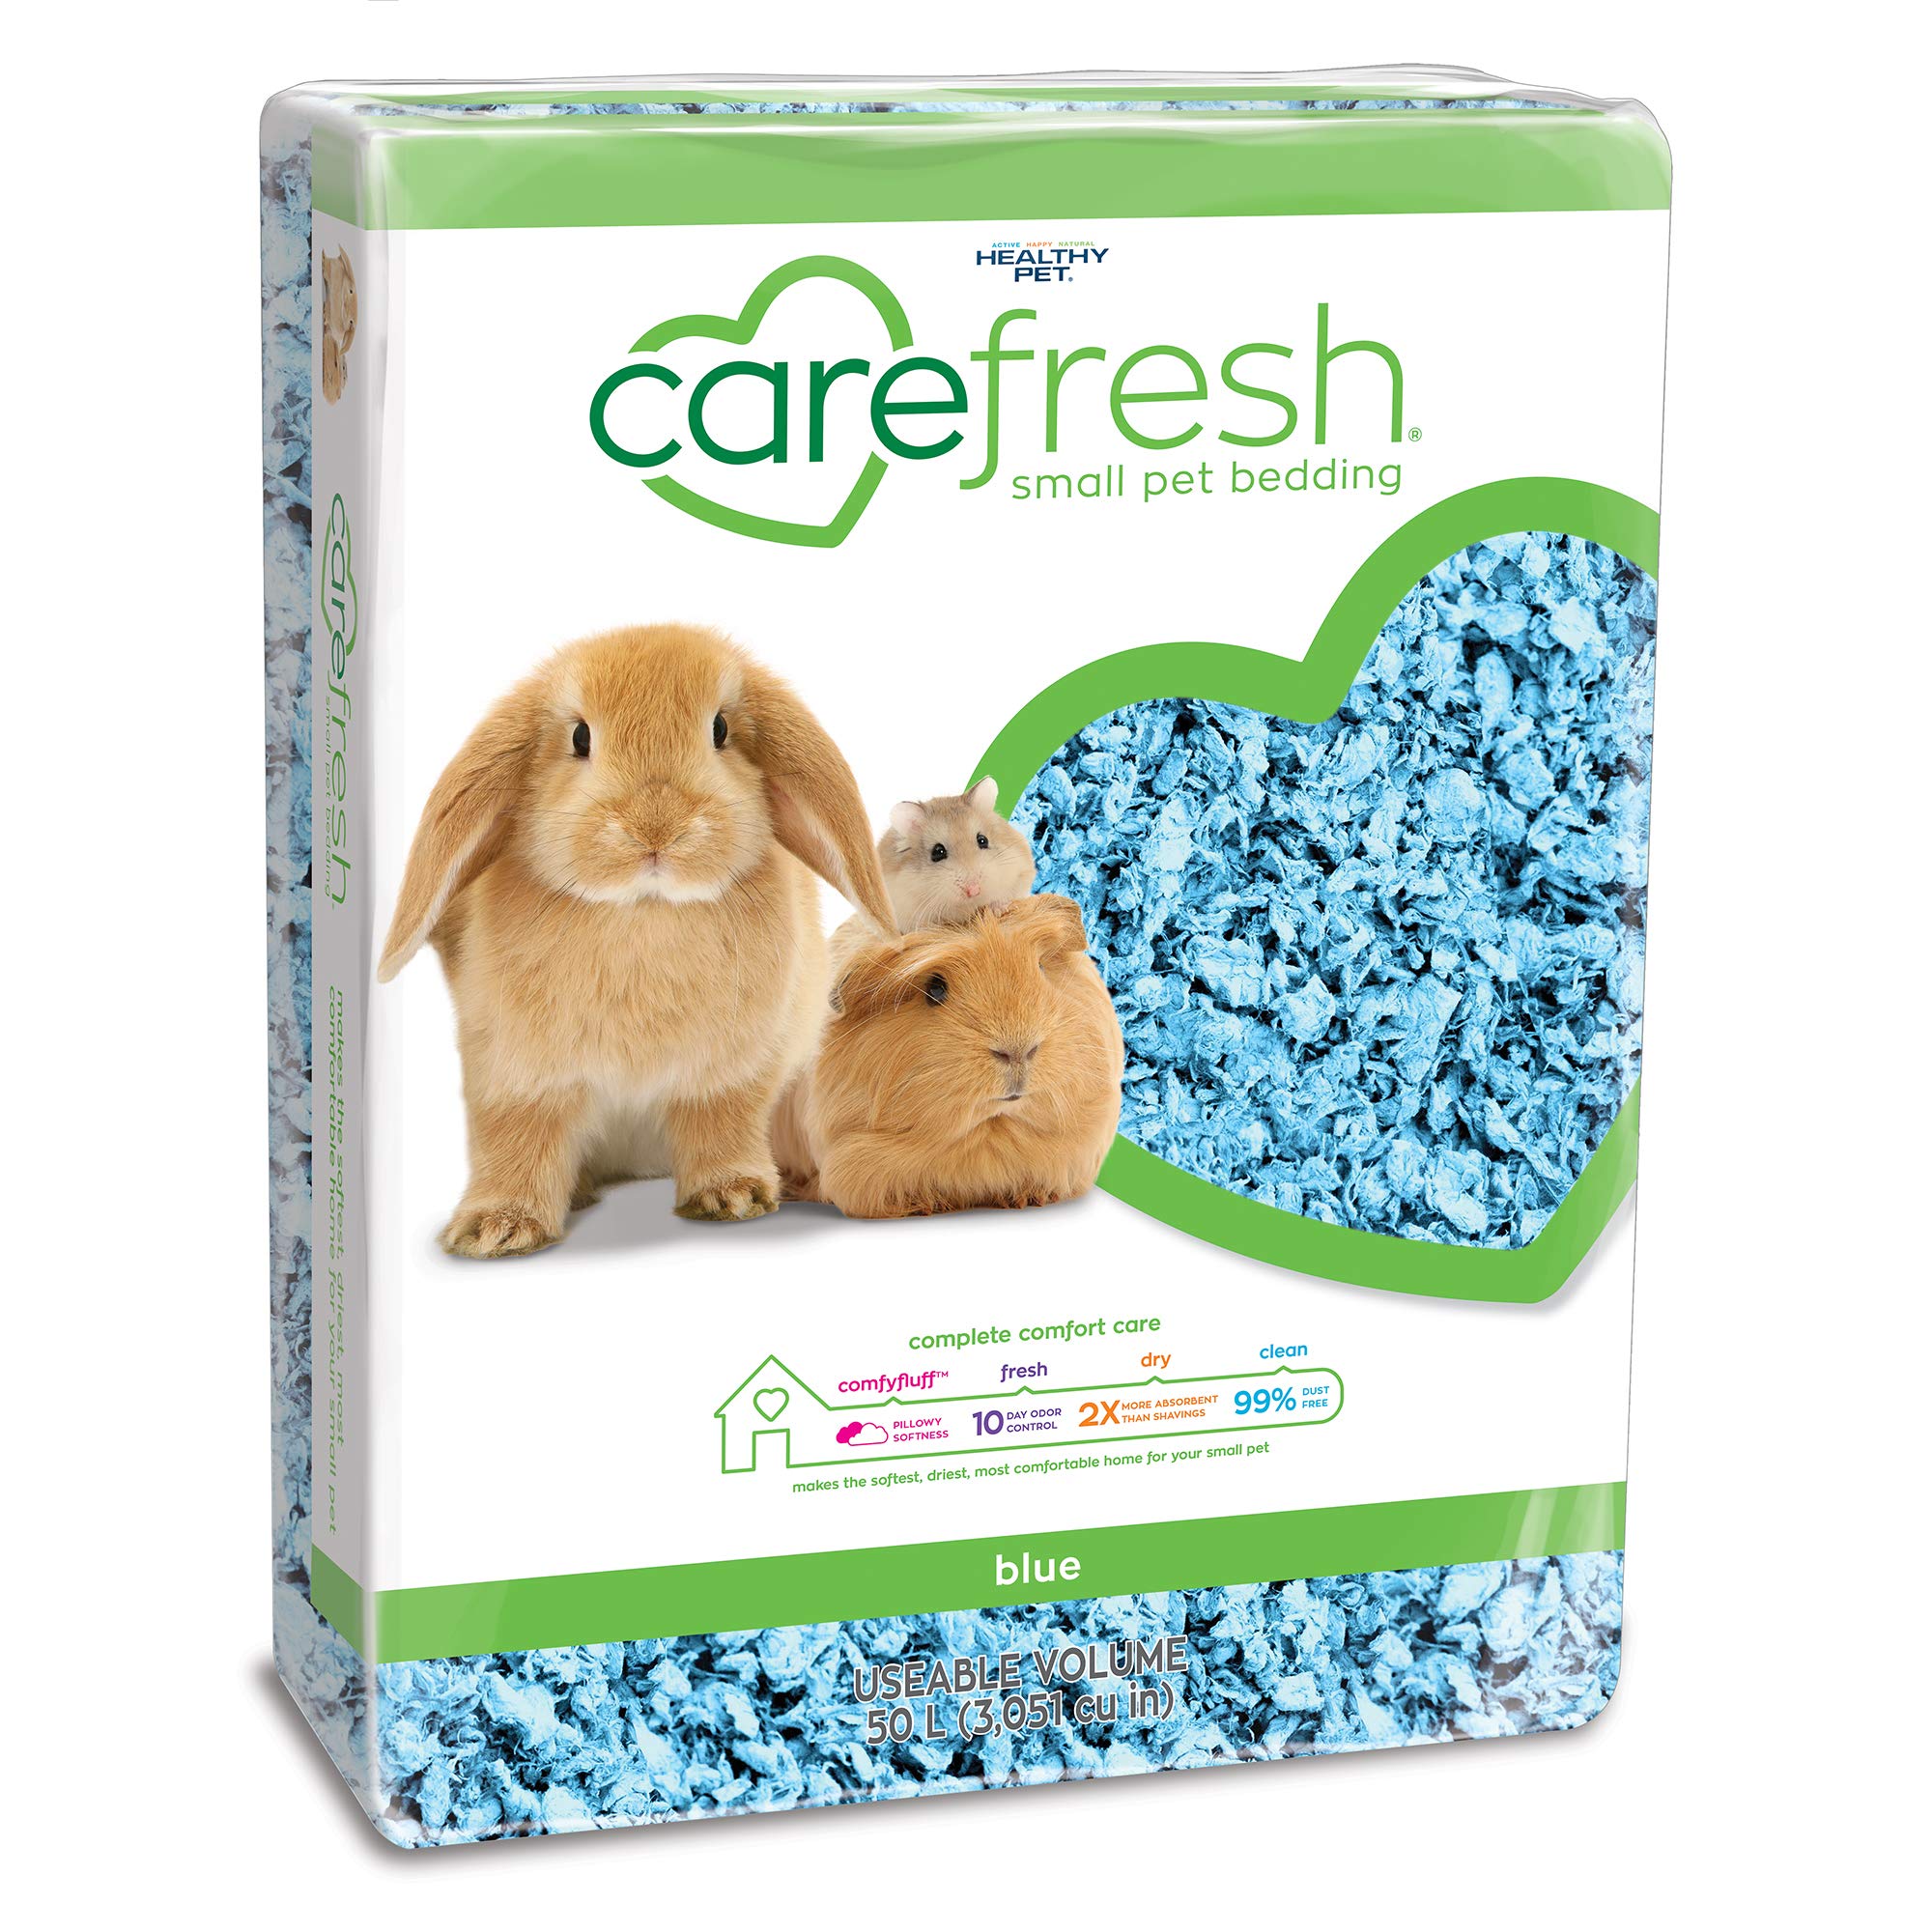 Carefresh 99% Dust-Free Blue Natural Paper Small Pet Bedding with Odor Control, 50 L